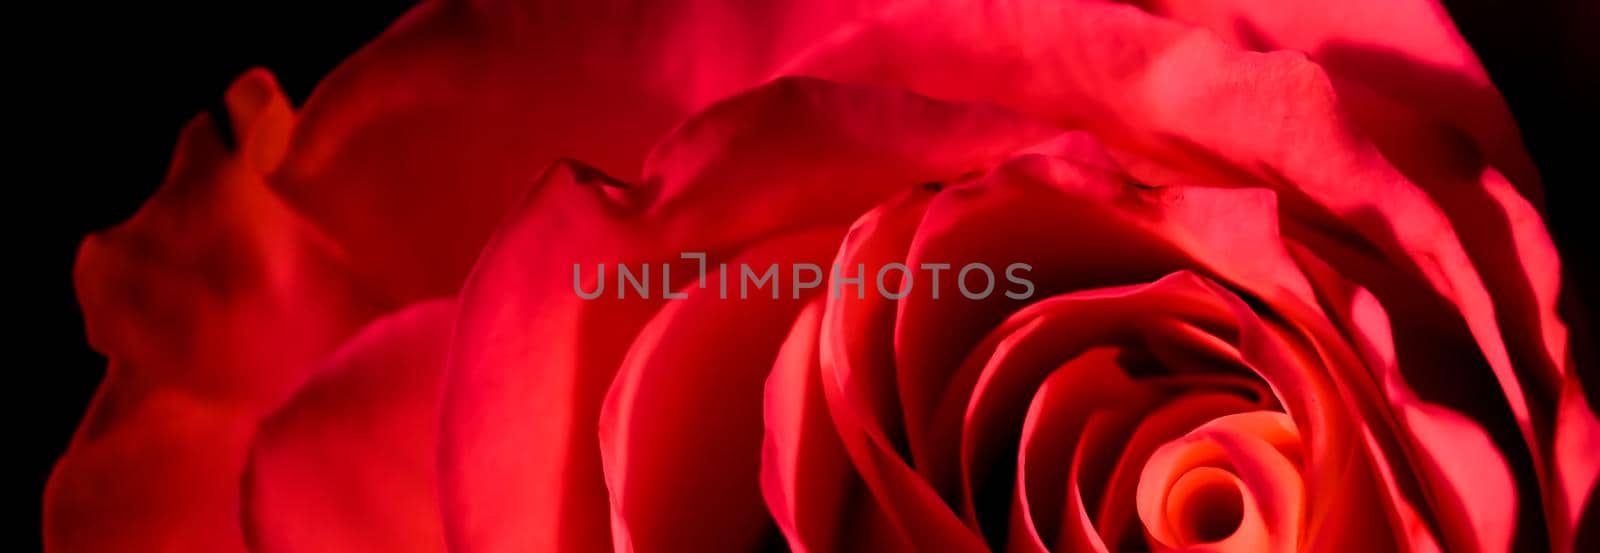 Botanical concept, invitation card - Soft focus, abstract floral background, red rose flower. Macro flowers backdrop for holiday brand design by Olayola